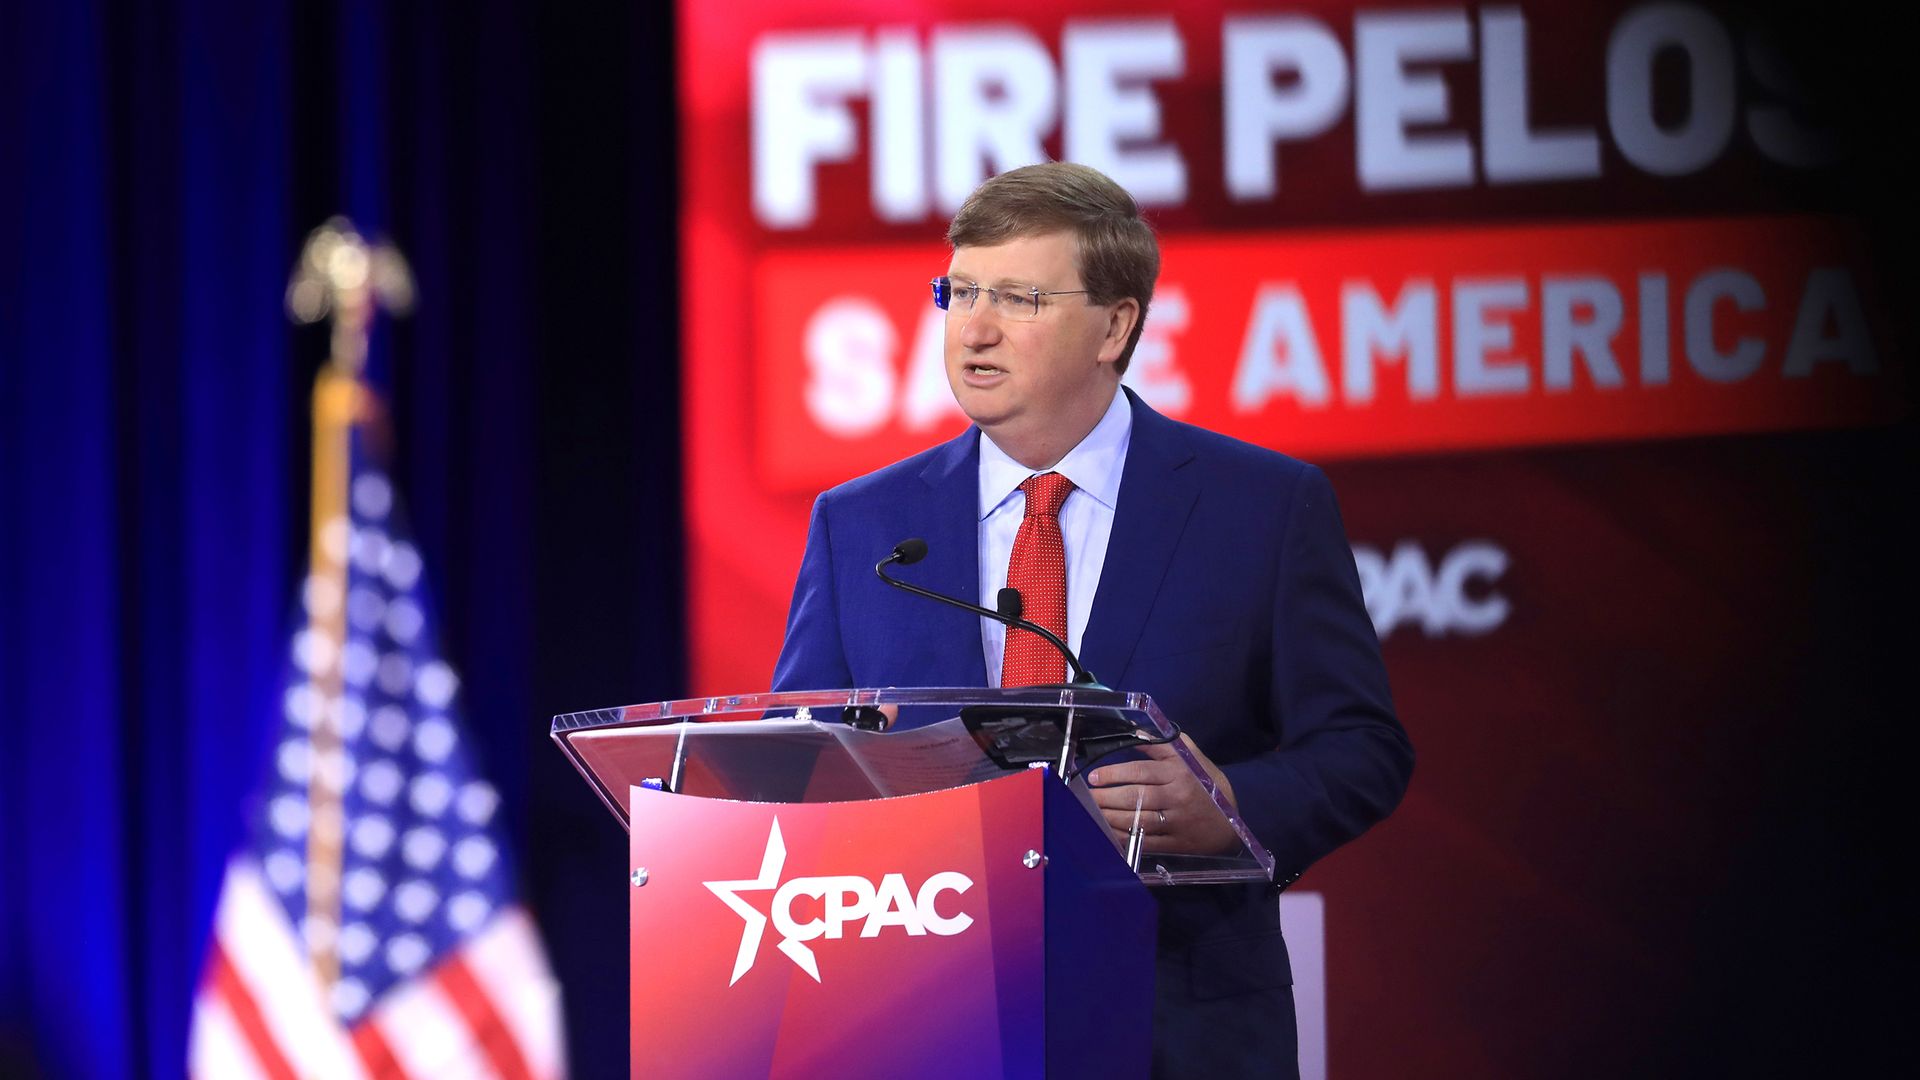 Photo of Tate Reeves speaking from a podium on a CPAC stage